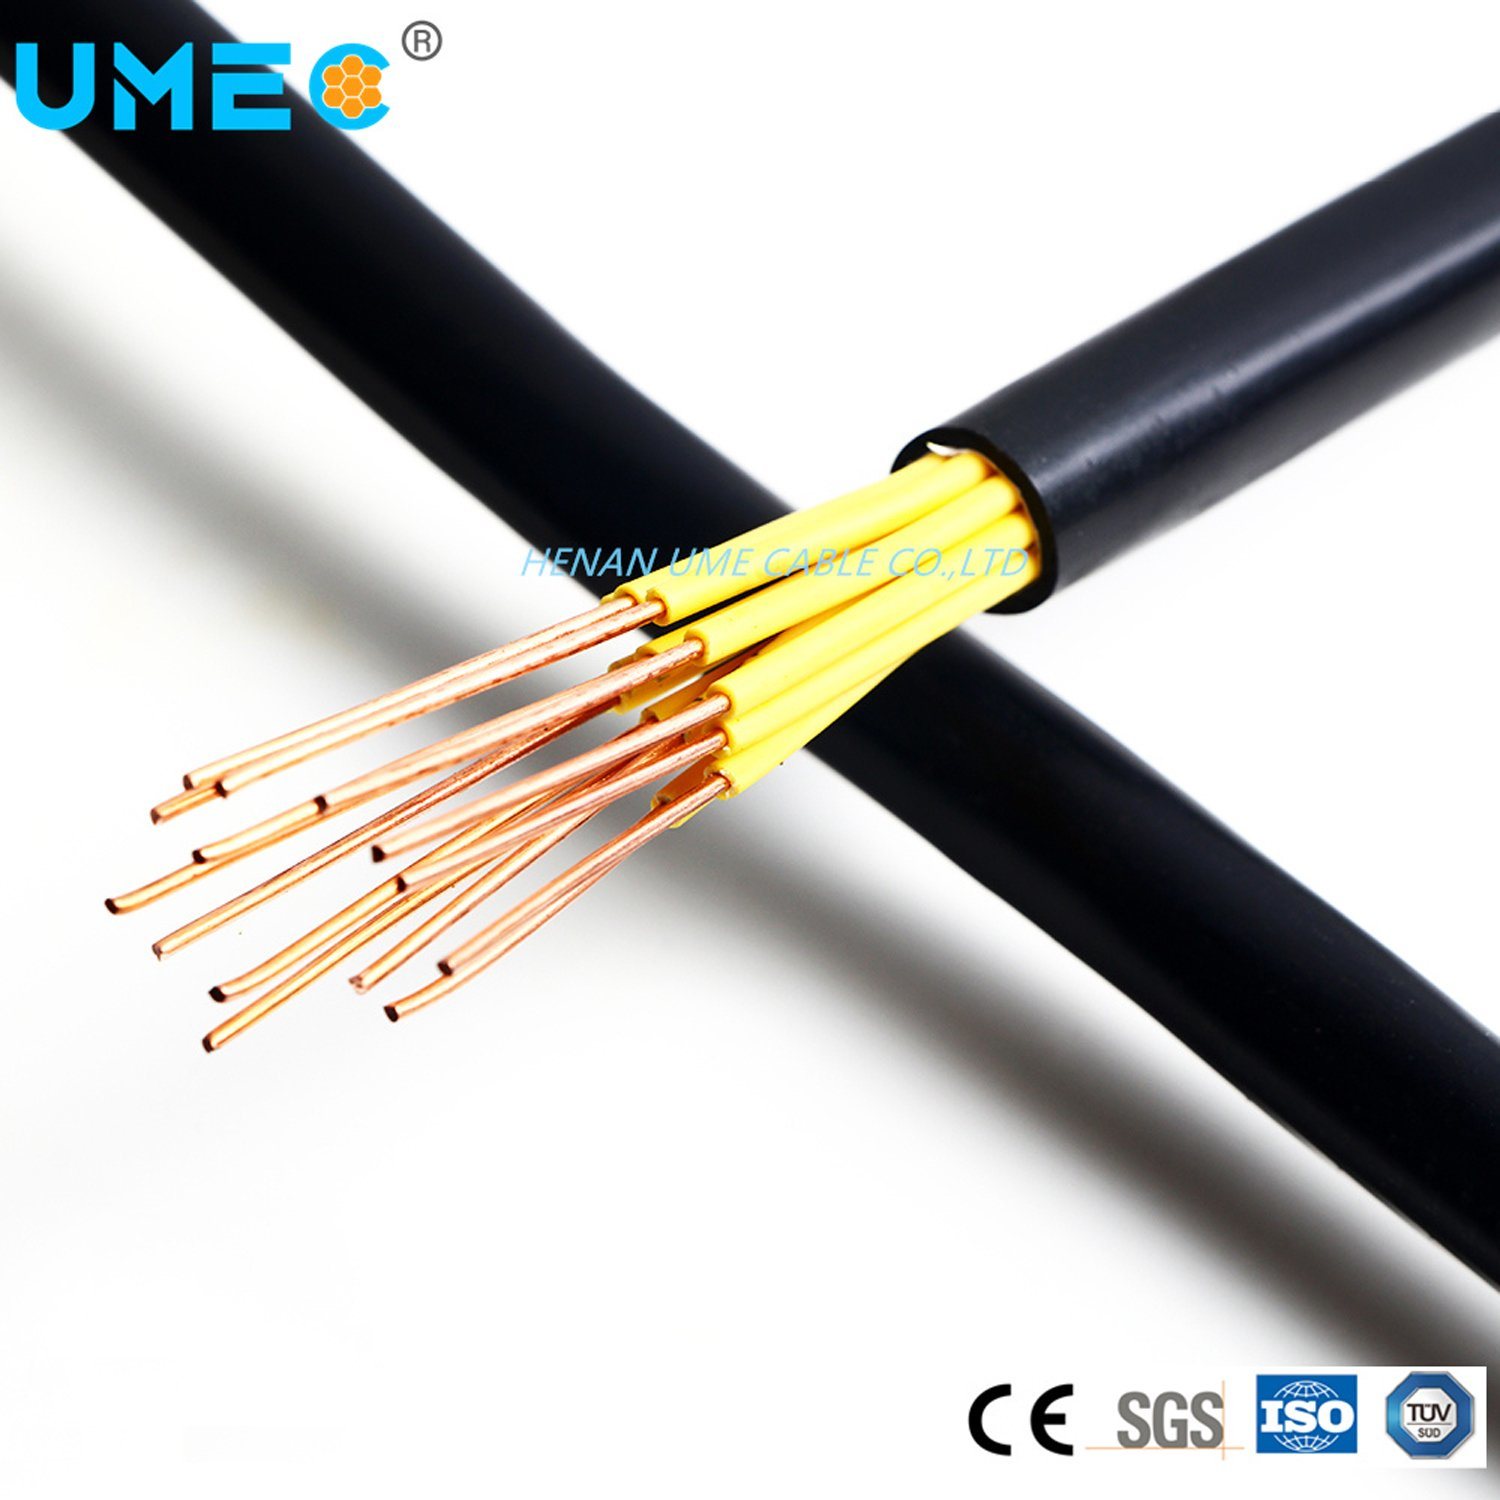 PVC Copper Braid Shielded Flexible Electrical Cable Wire